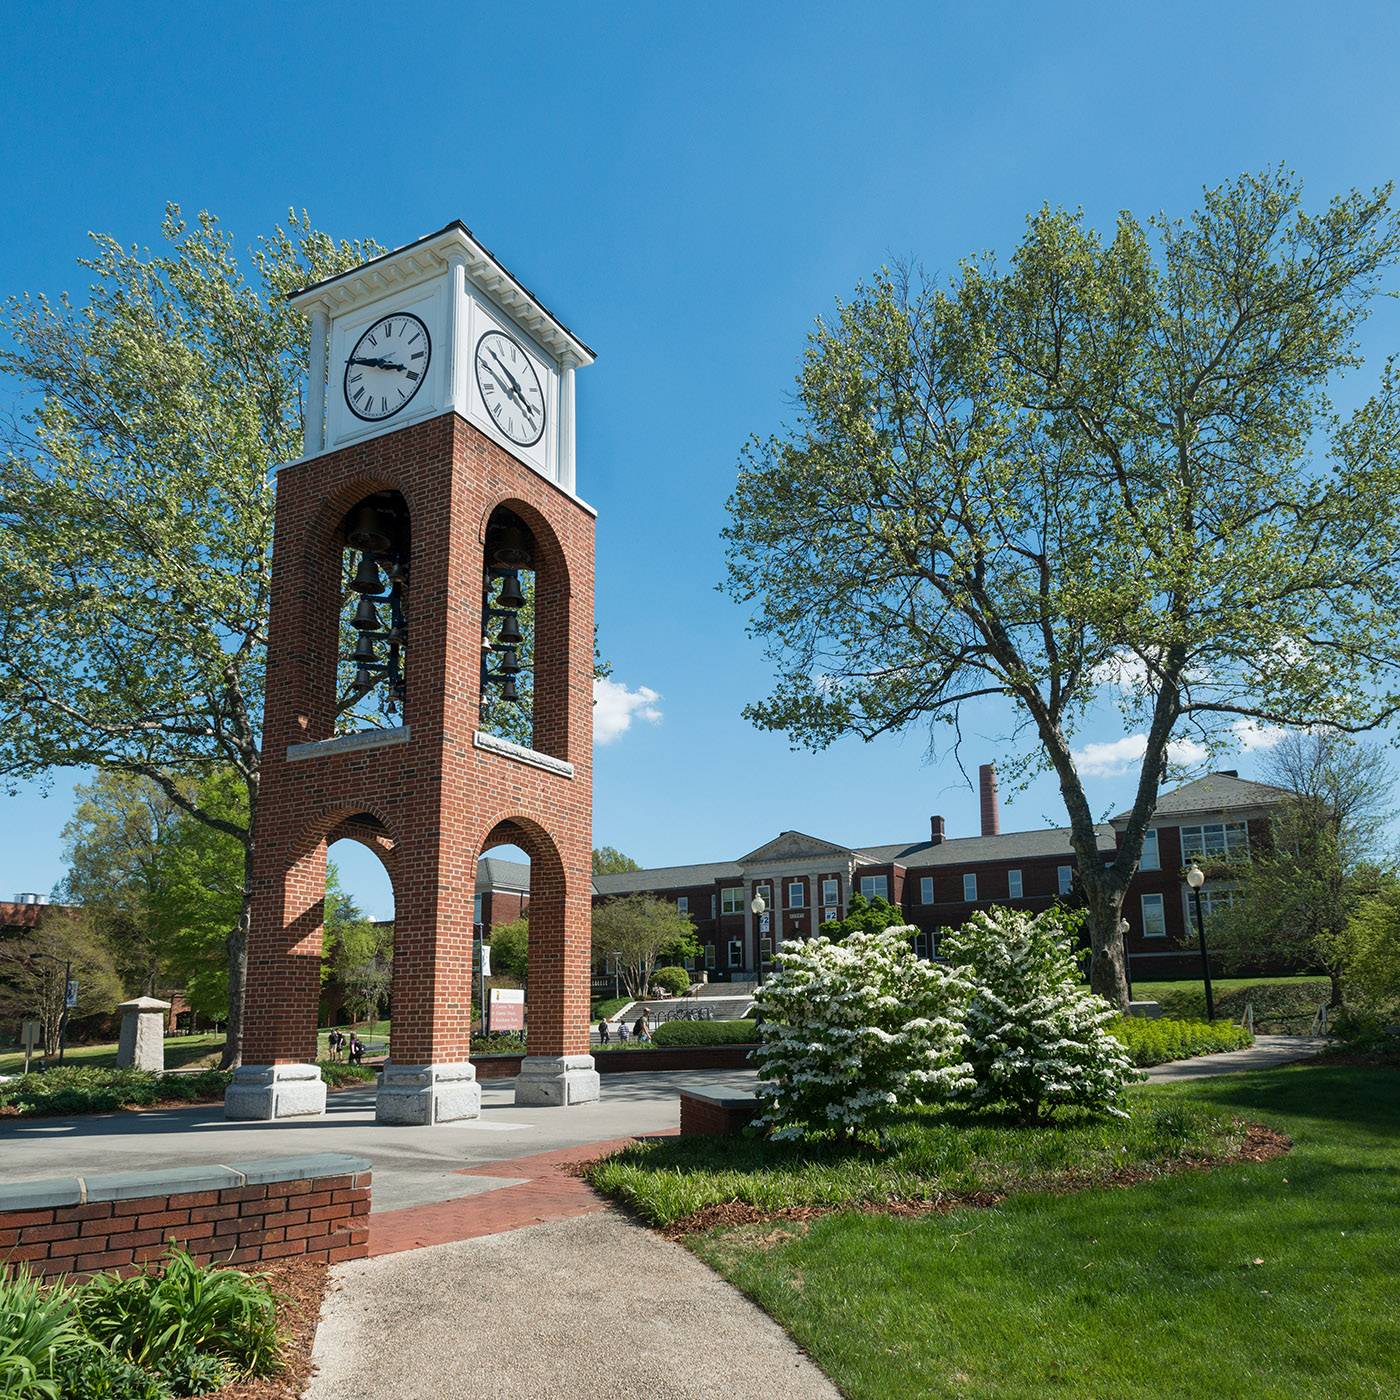 The UNC Greensboro bell tower on a clear day.